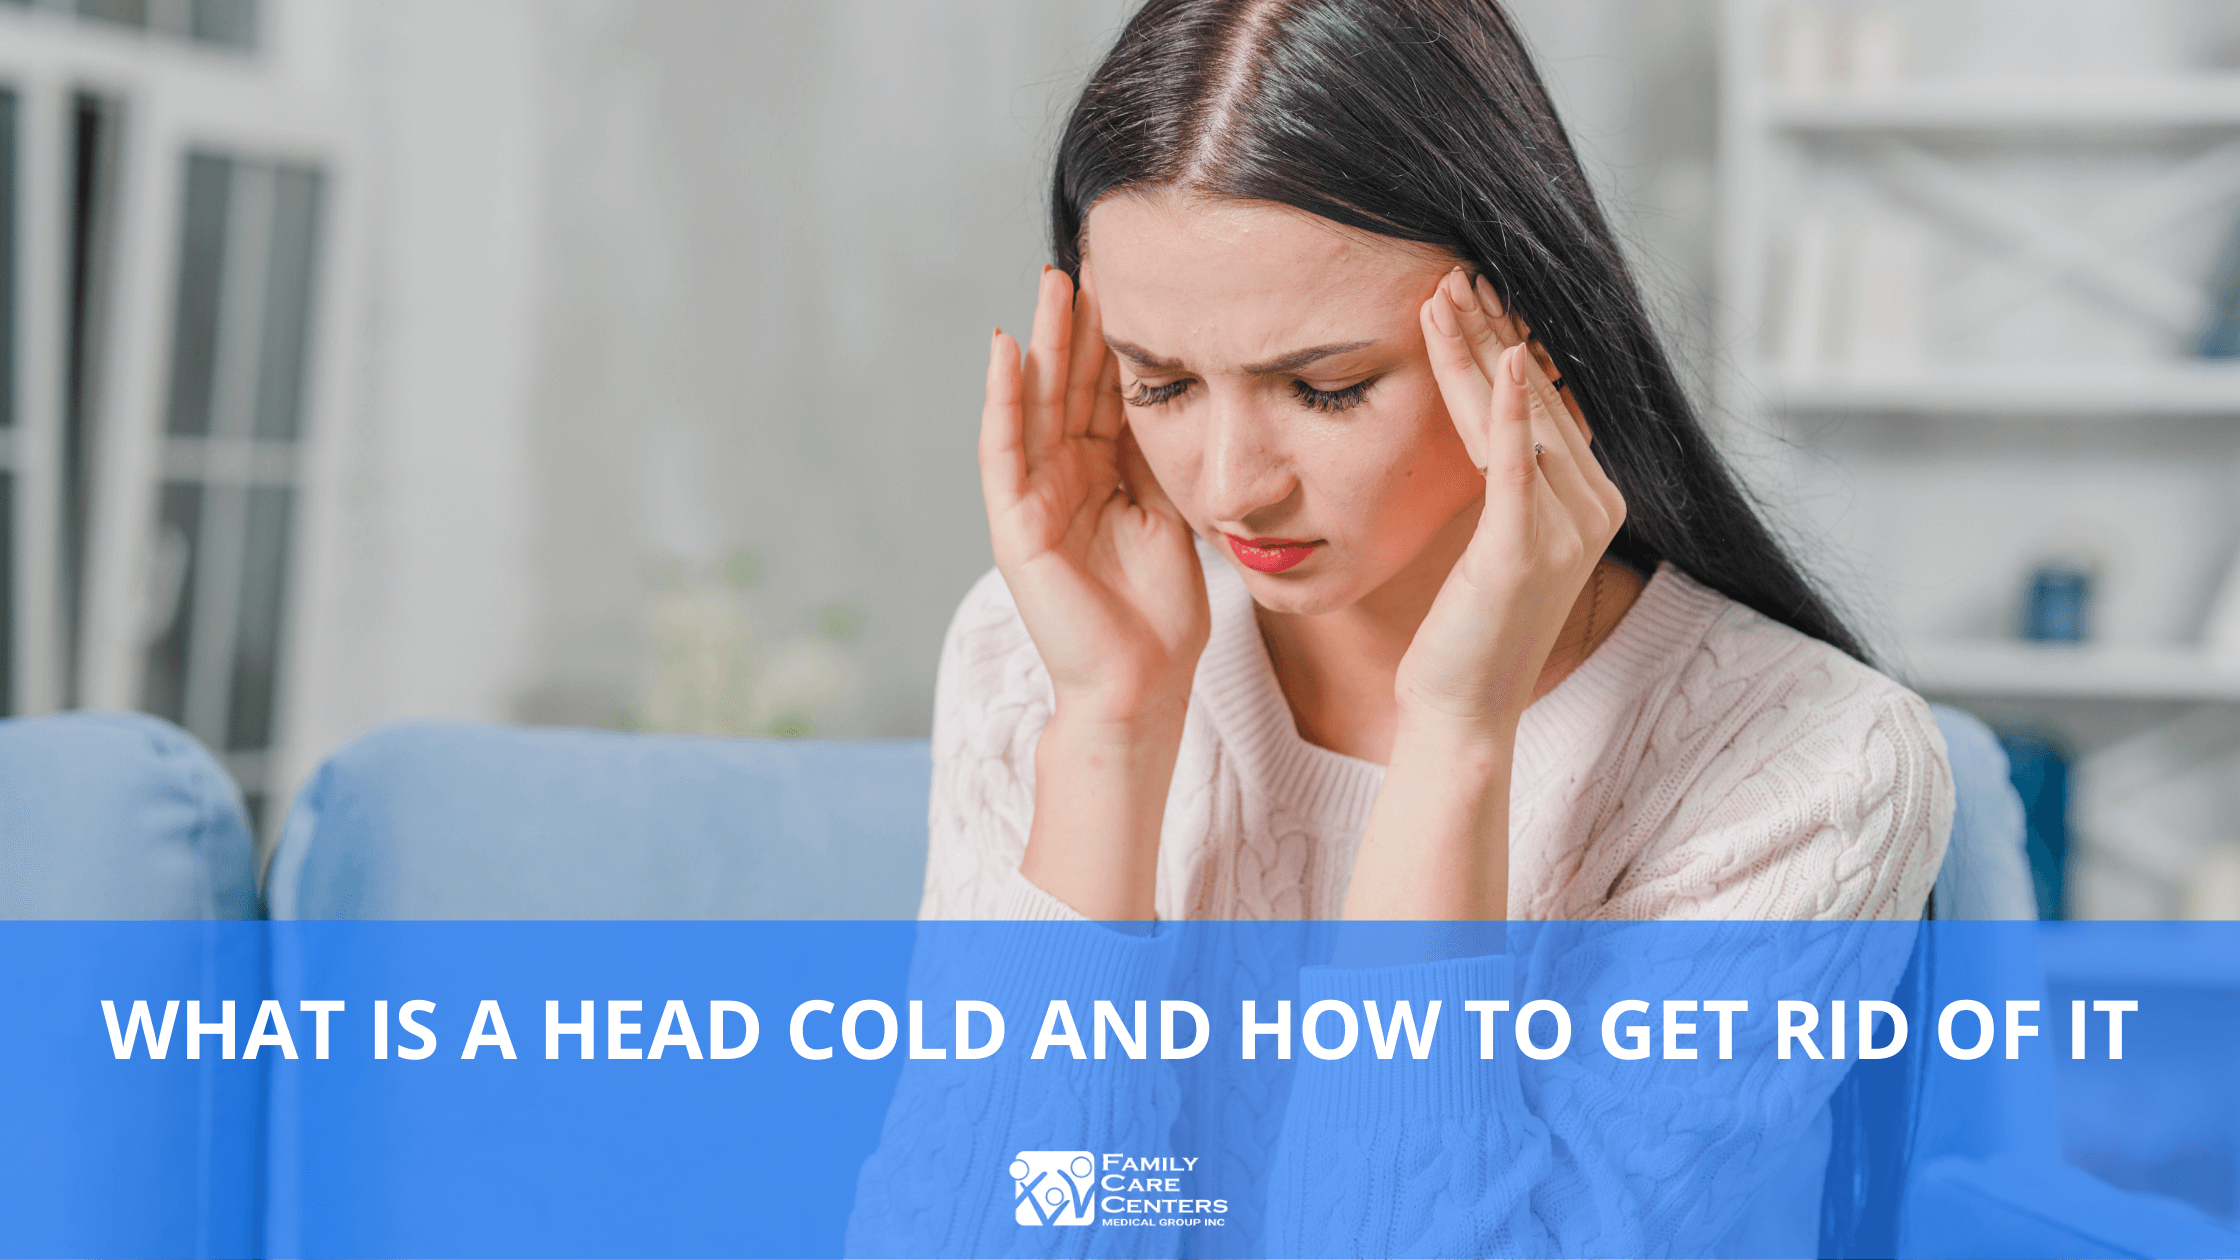 What Is a Head Cold and How to Get Rid of It